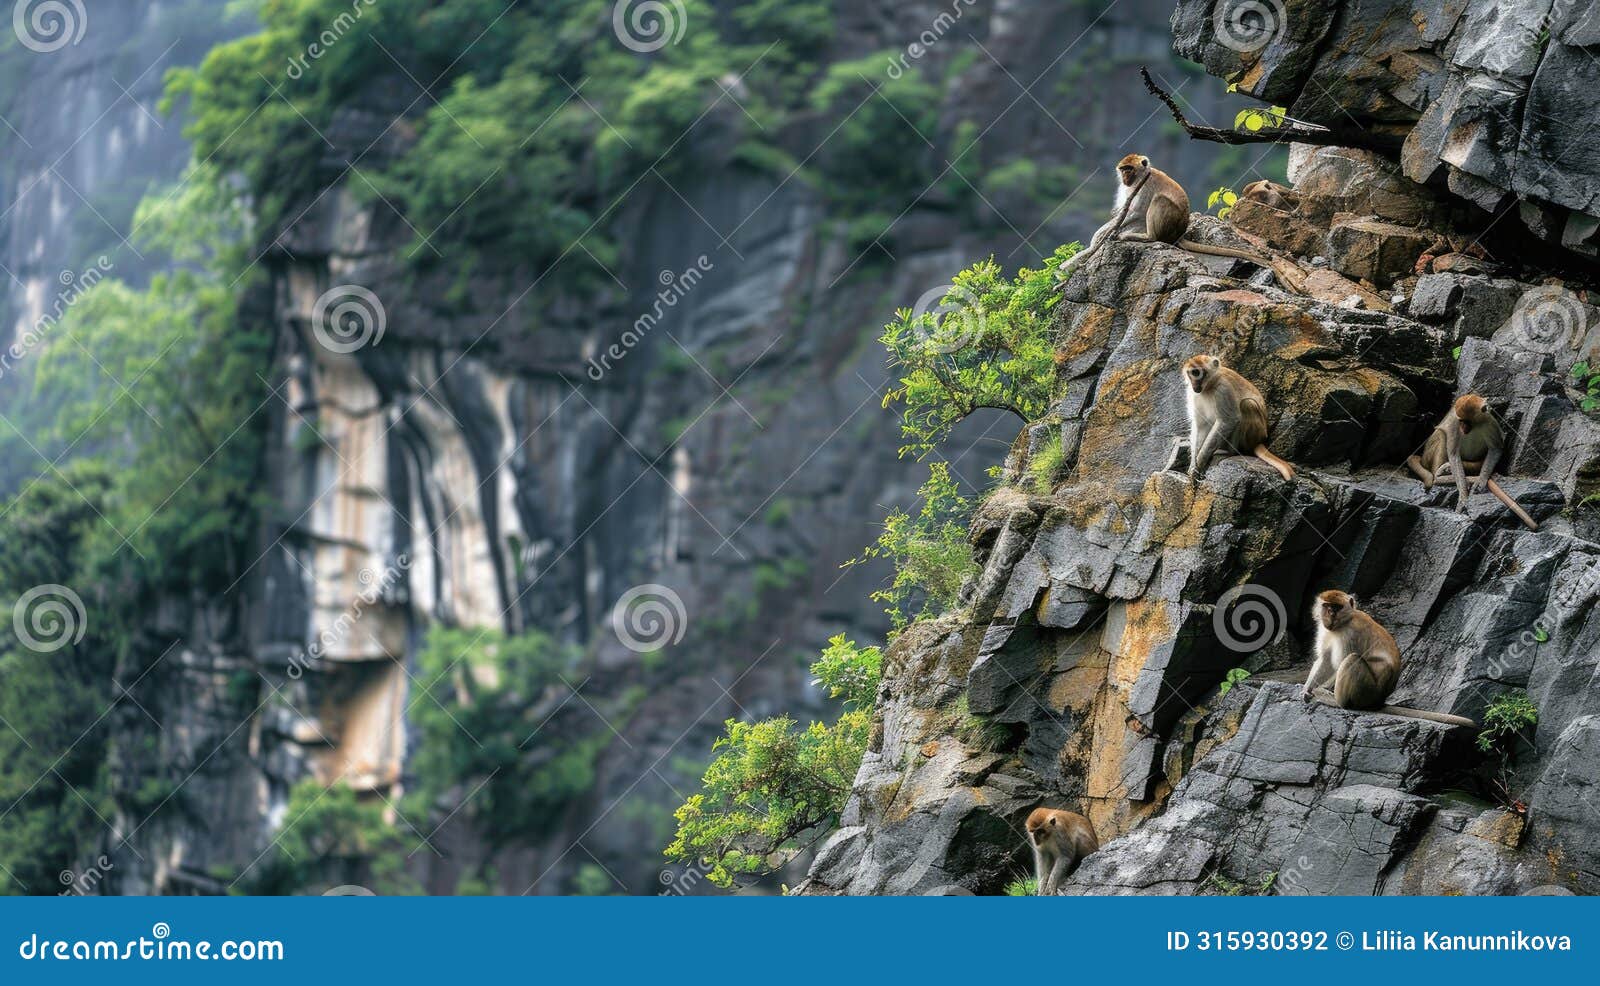 a rock wall adorned in lush green vegetation, home to a community of brown monkeys, their playful antics contrasting